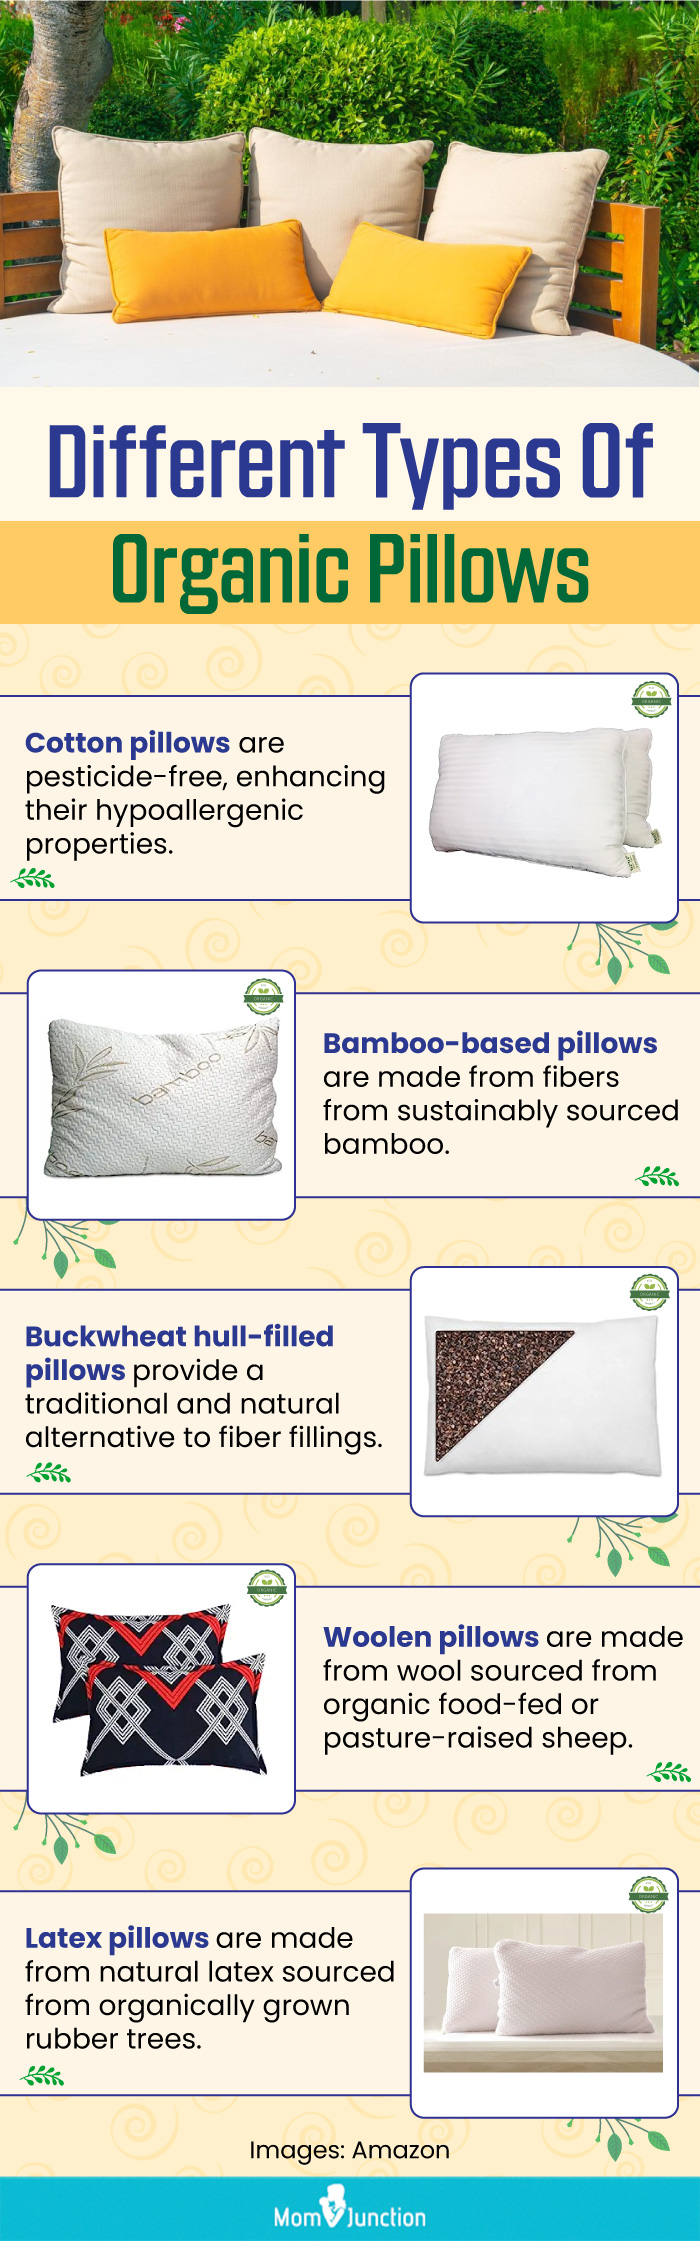 Different Types Of Organic Pillows (infographic)